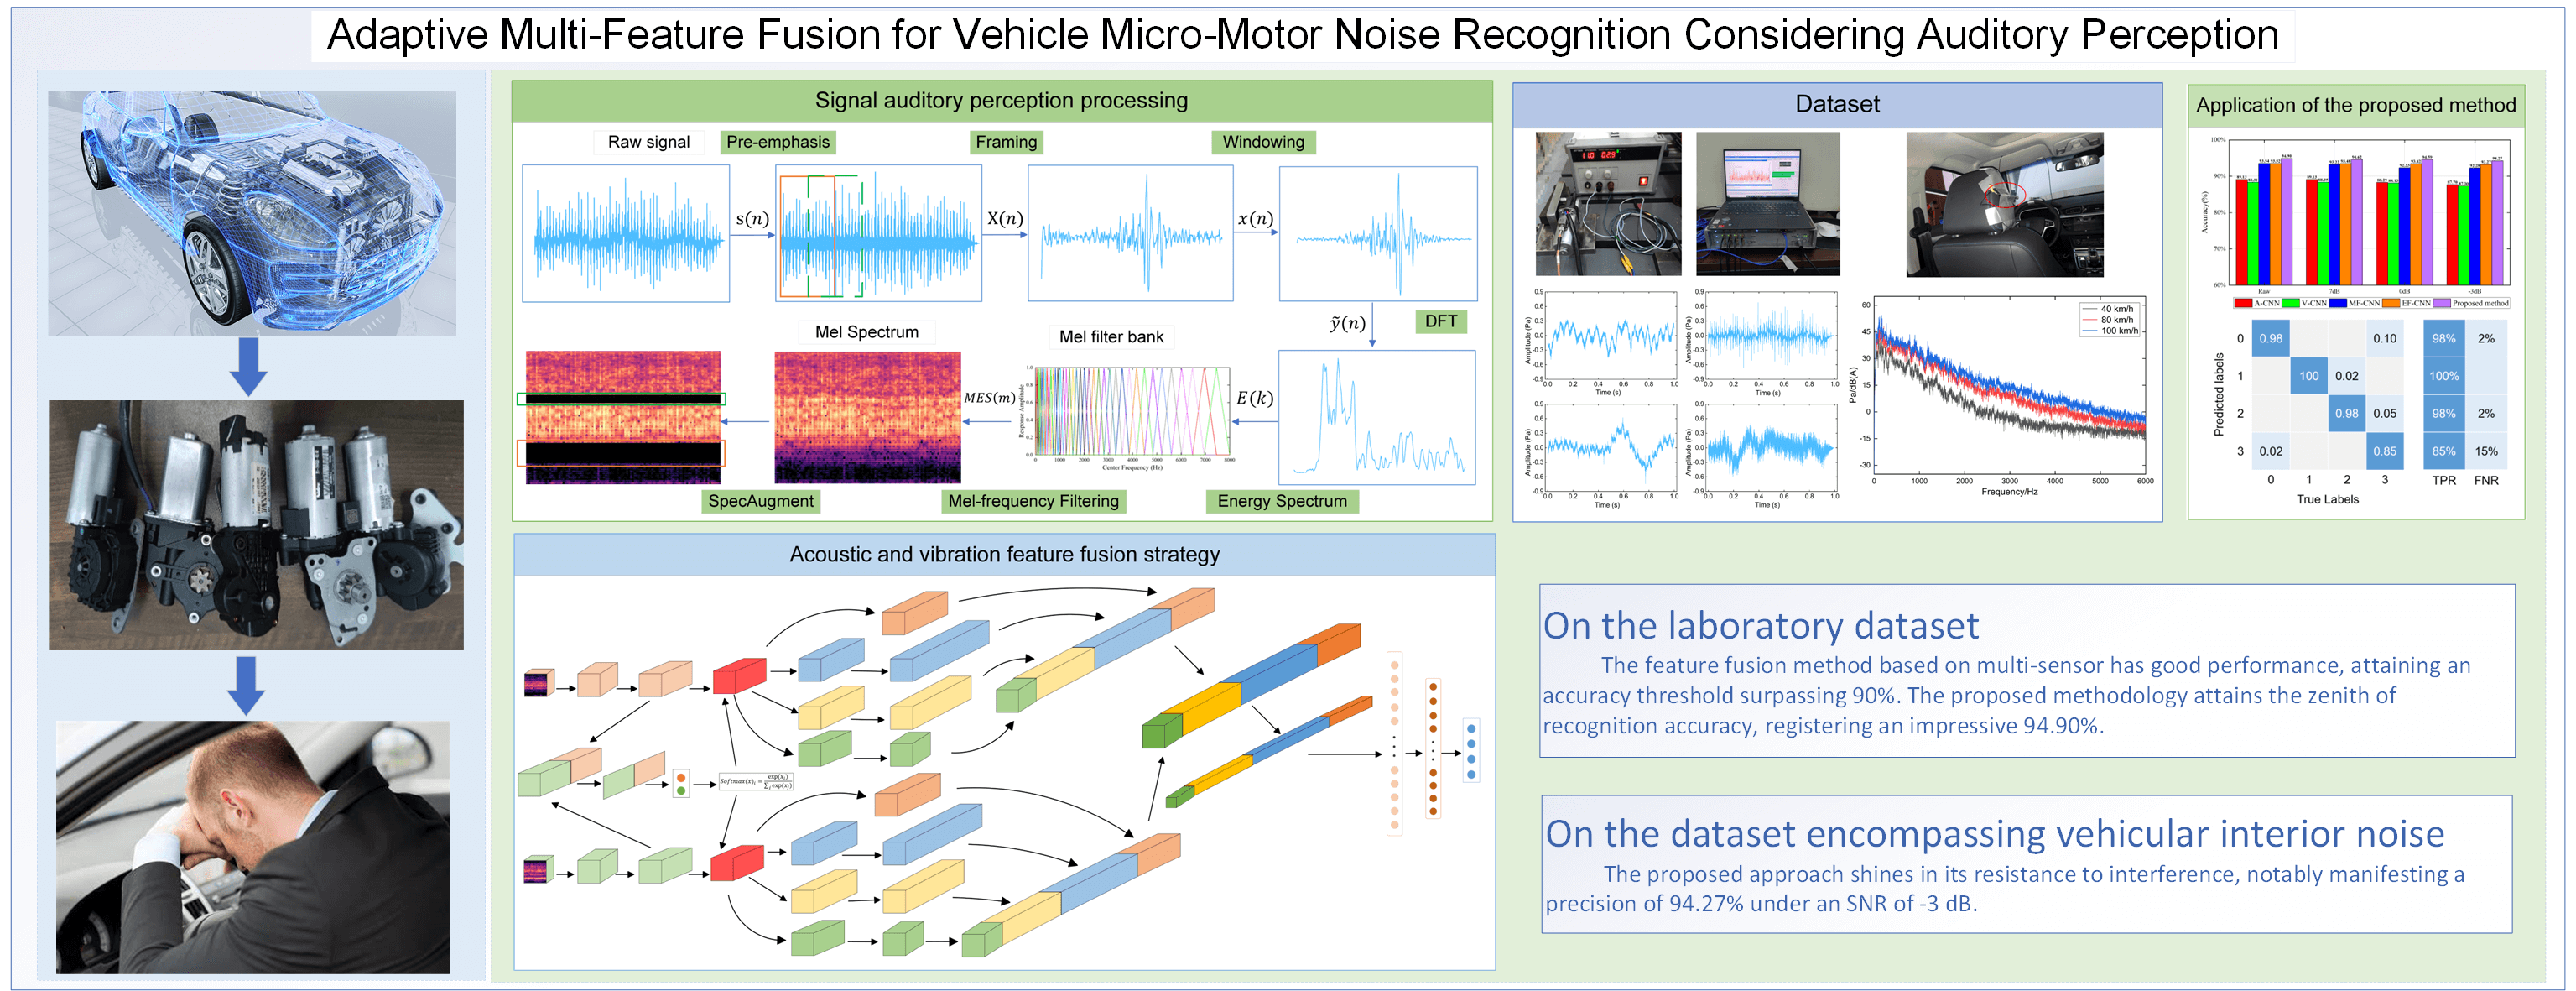 Adaptive Multi-Feature Fusion for Vehicle Micro-Motor Noise Recognition Considering Auditory Perception